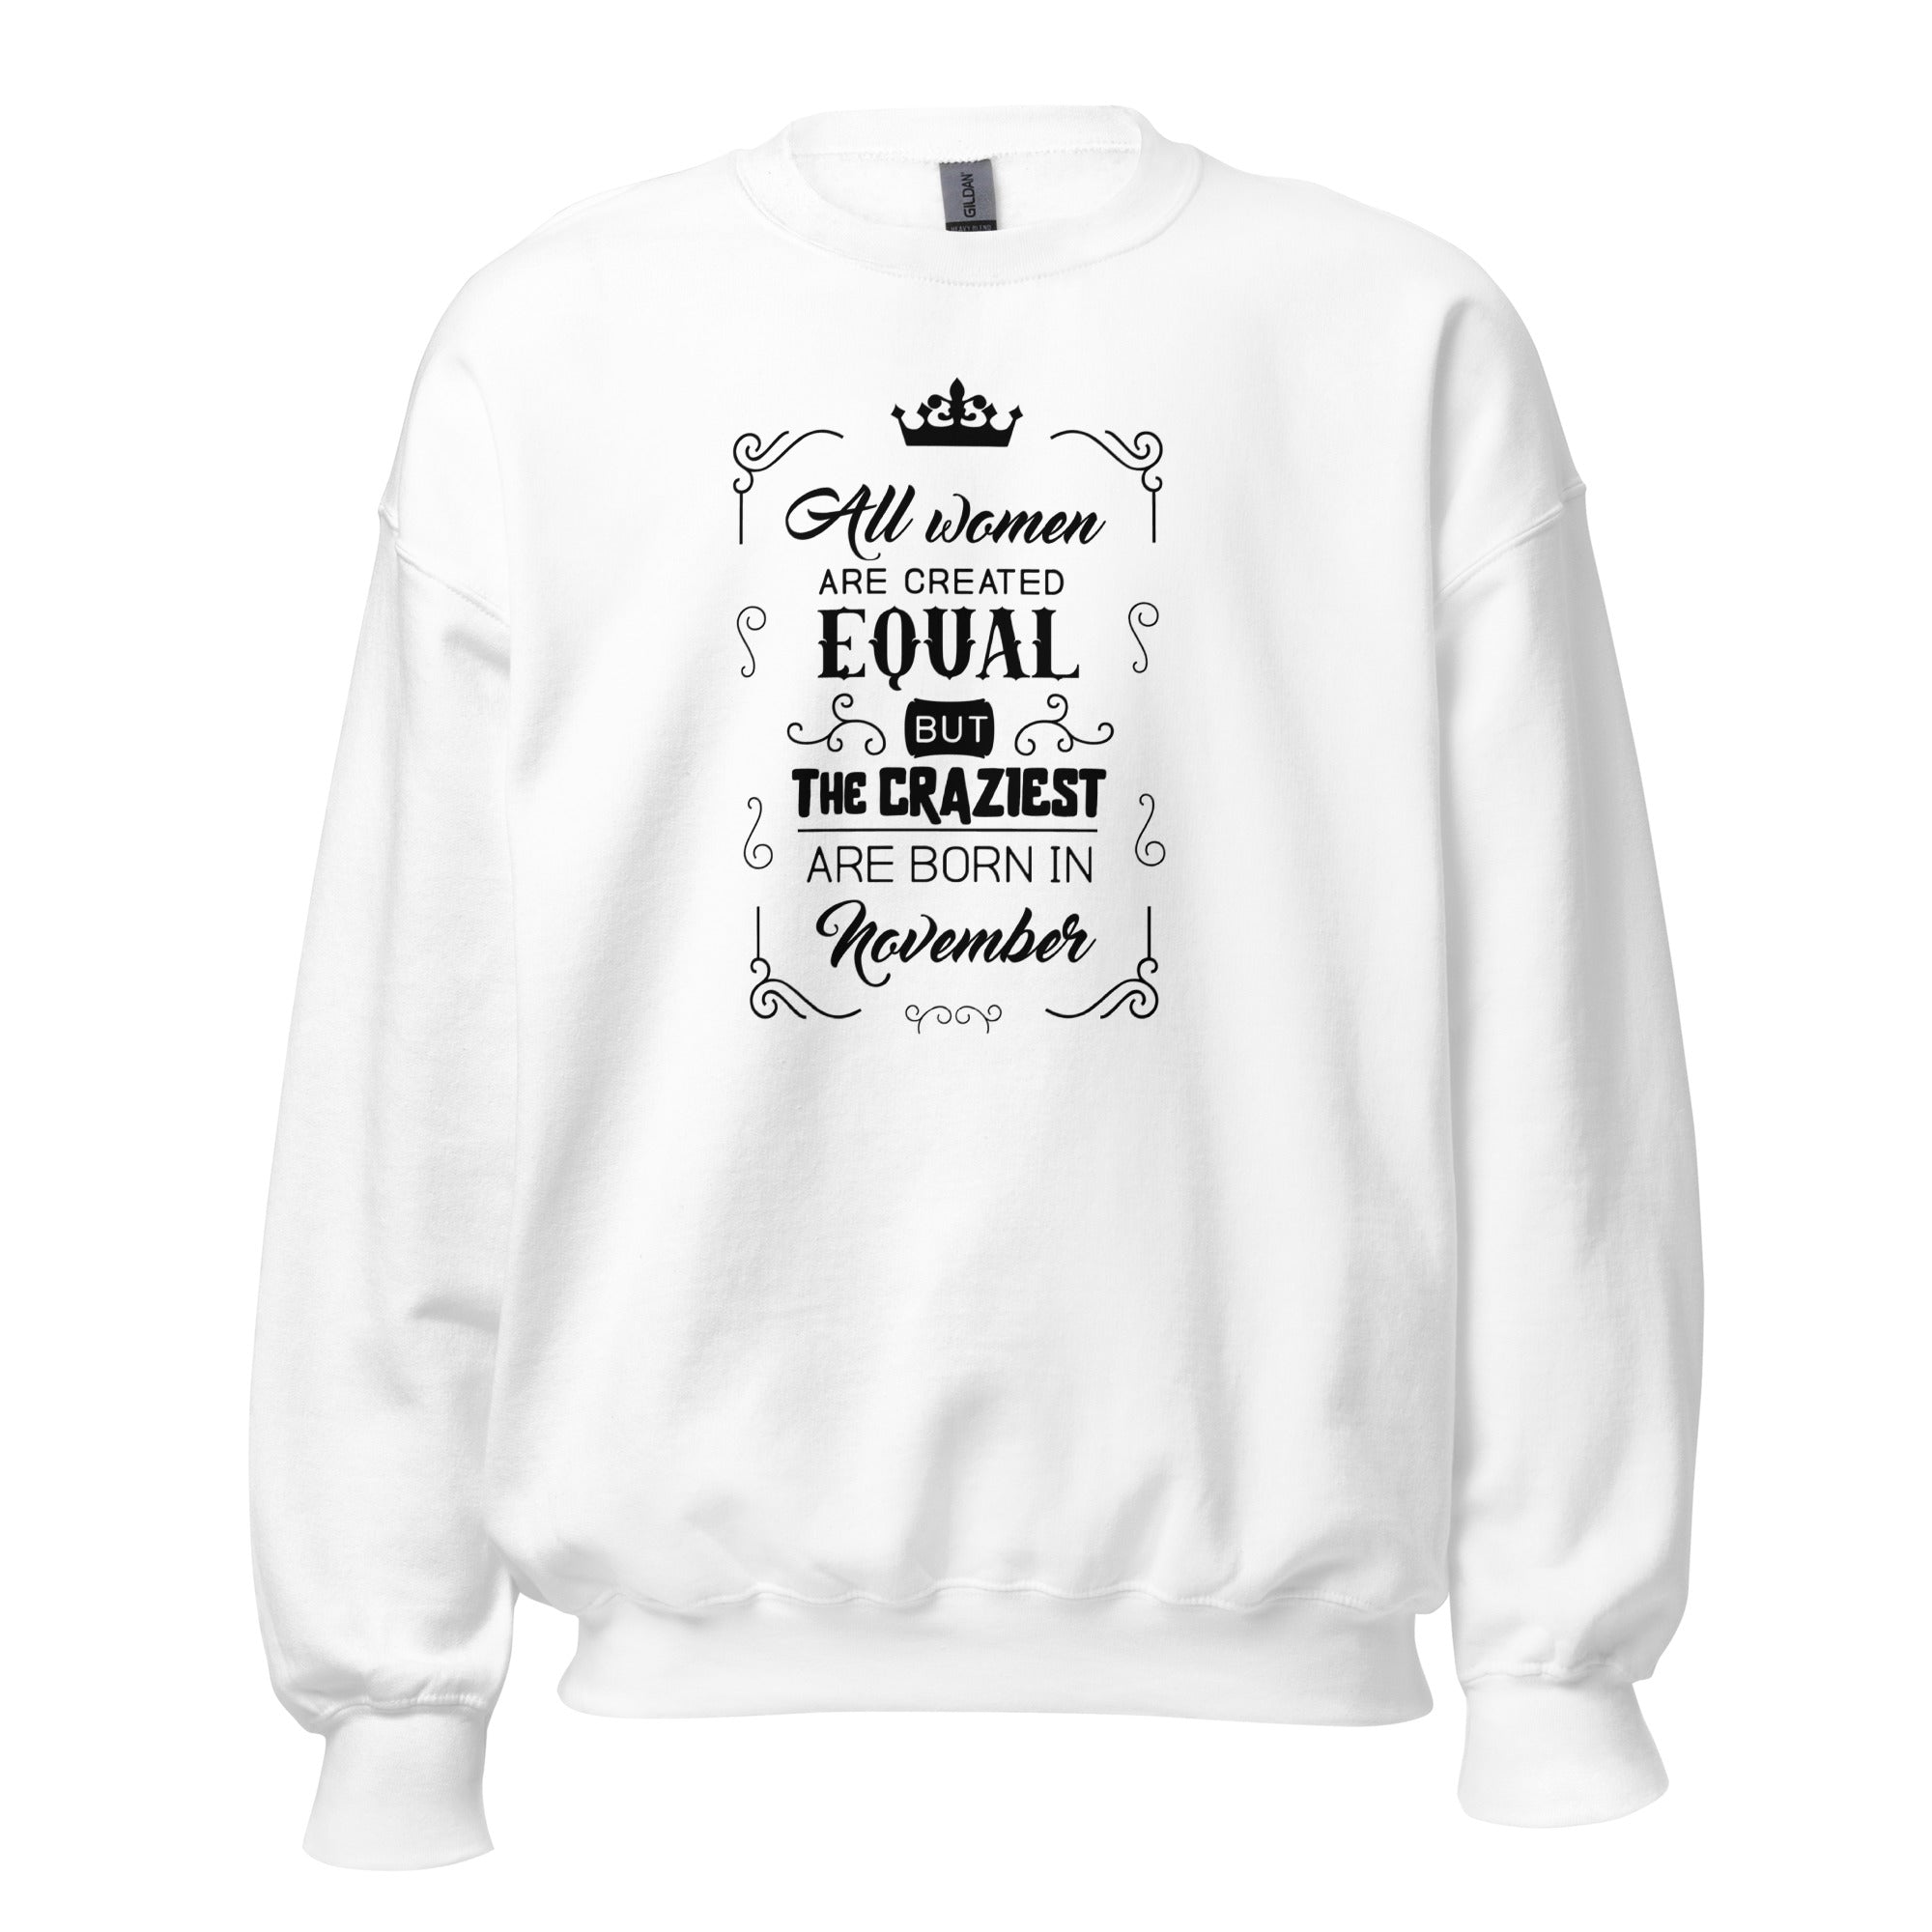 Women's Crew Neck Sweatshirt - All Women Are Created Equal But The Craziest Are Born in November - GRAPHIC T-SHIRTS